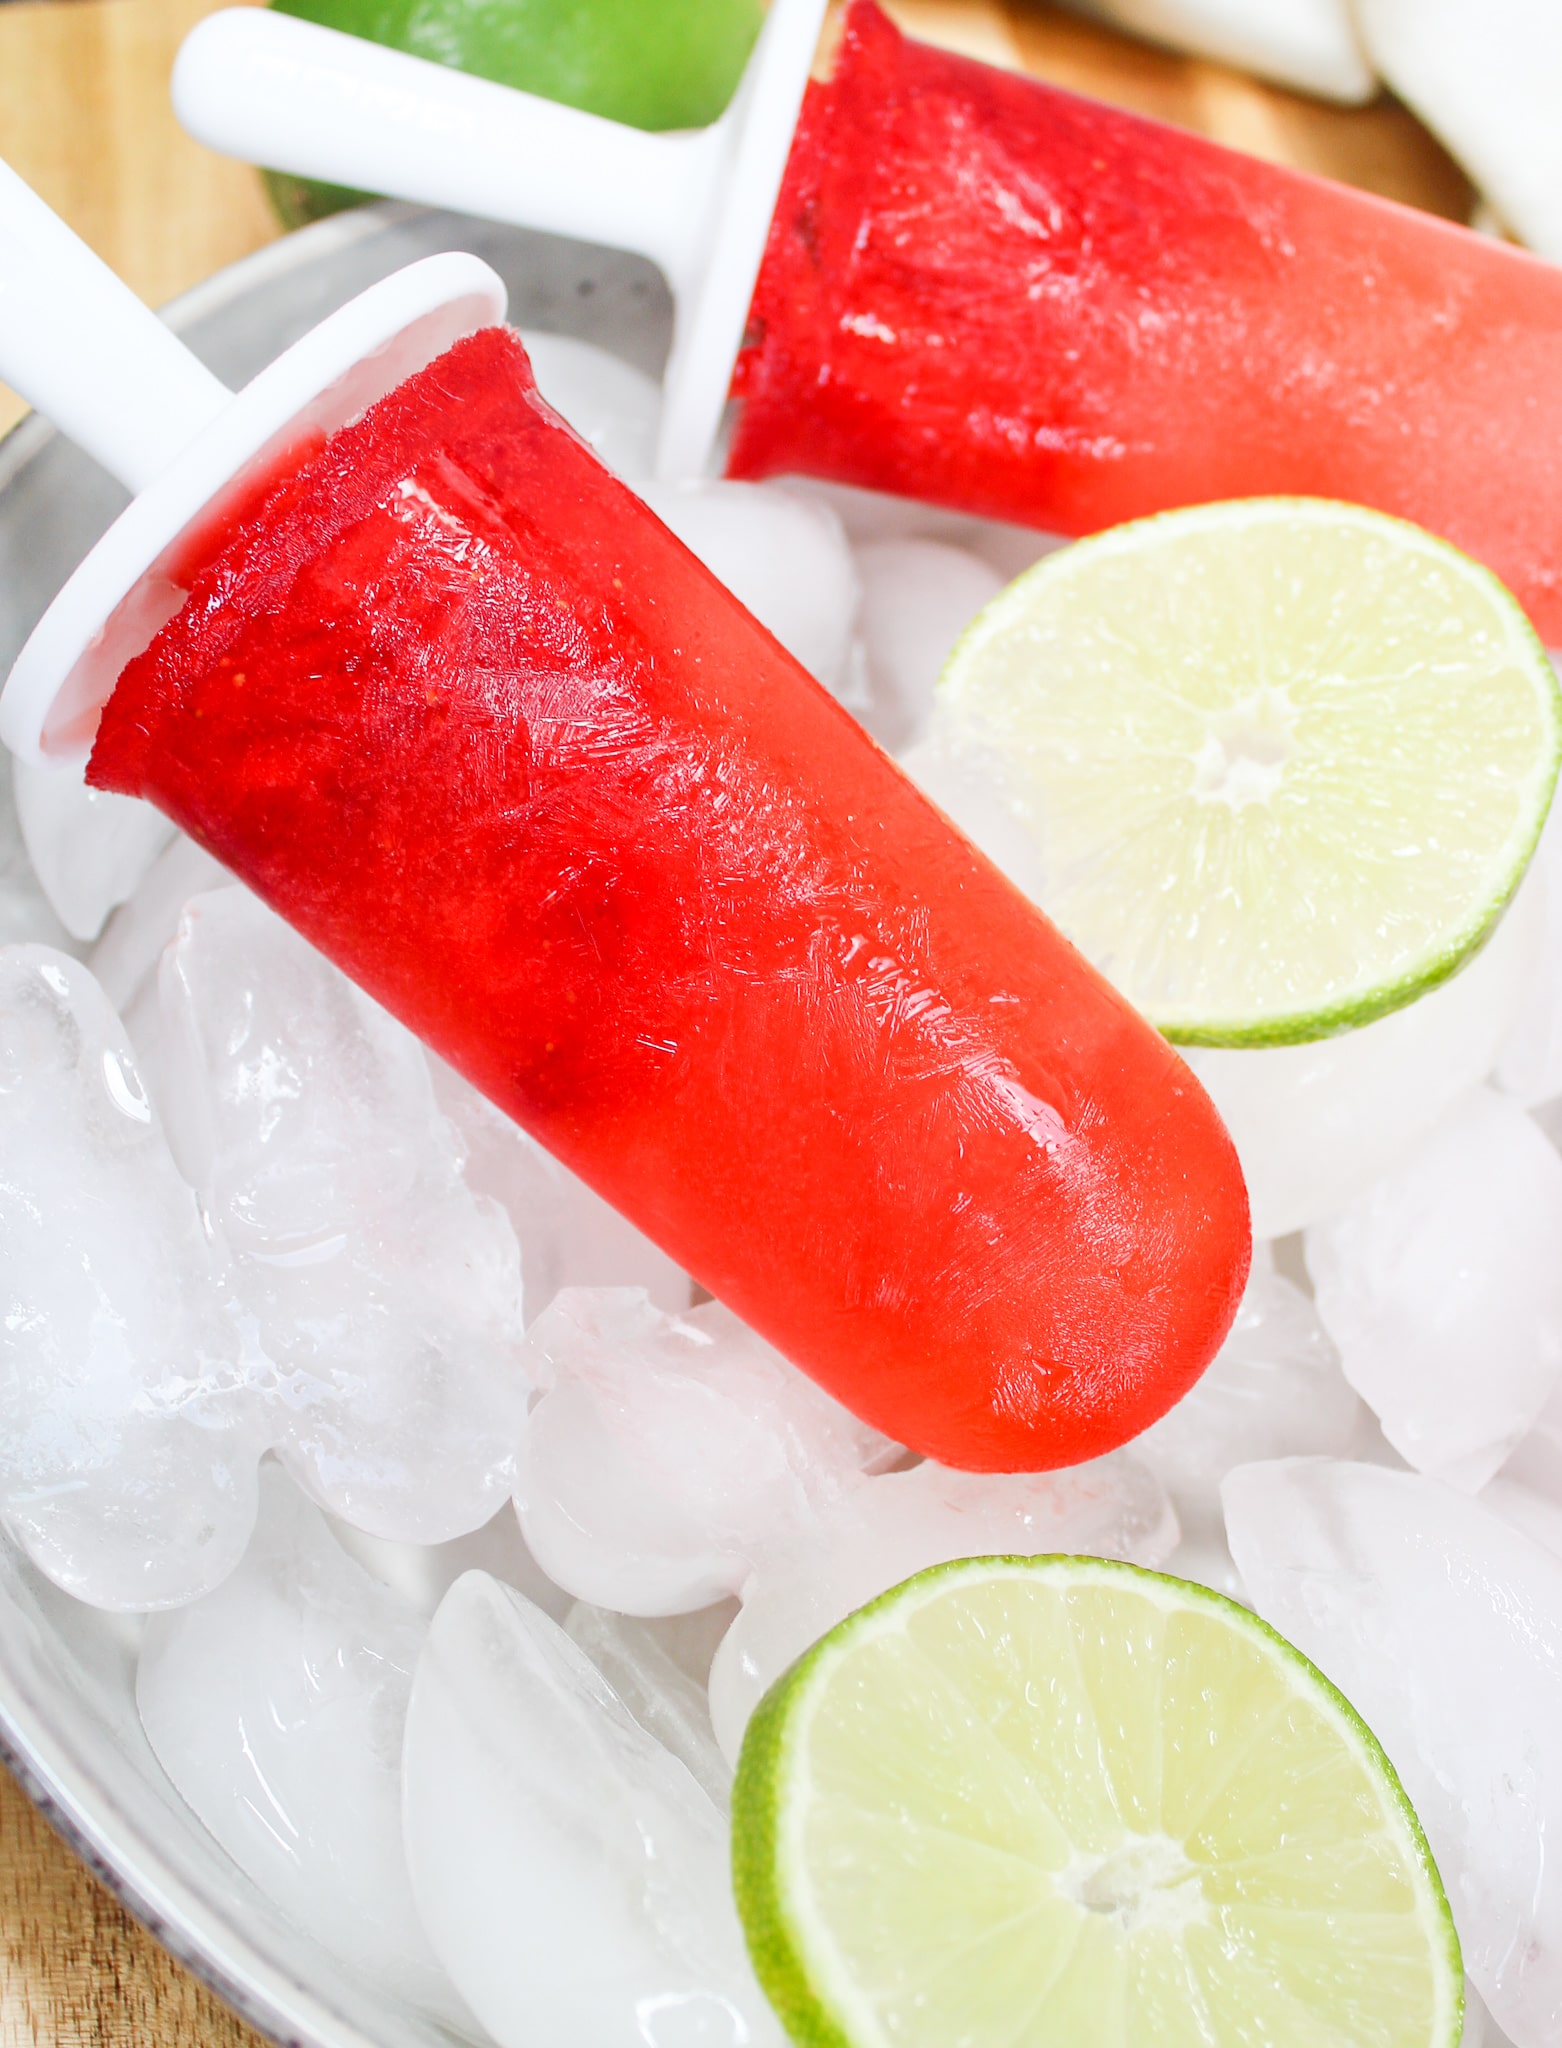 Strawberry Margarita Popsicle over ice with limes